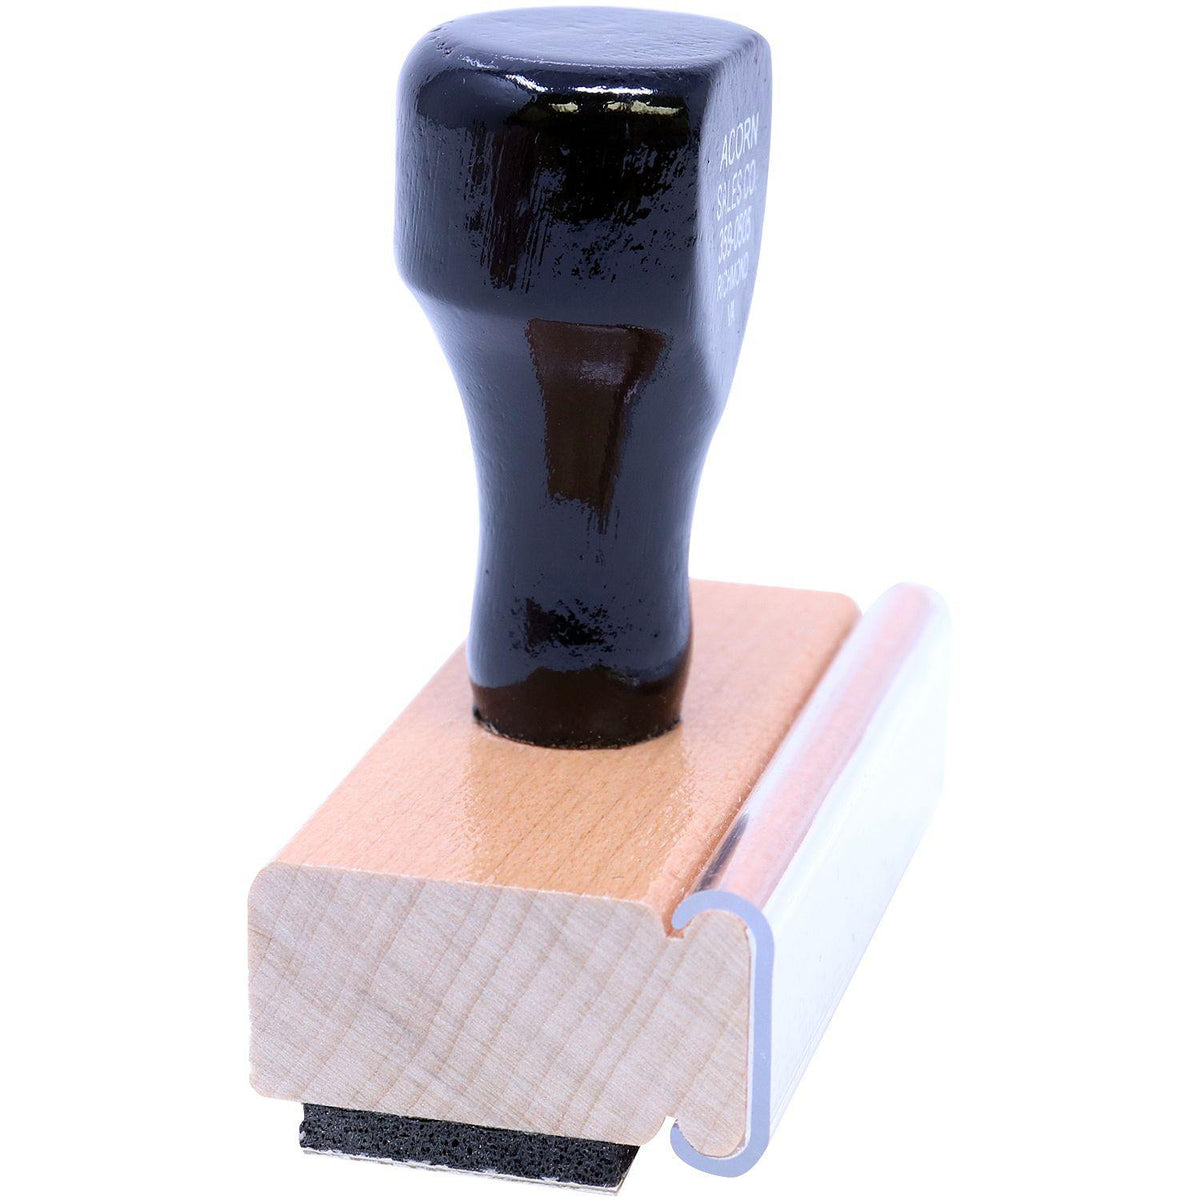 Side View of Curly Copy Rubber Stamp at an Angle